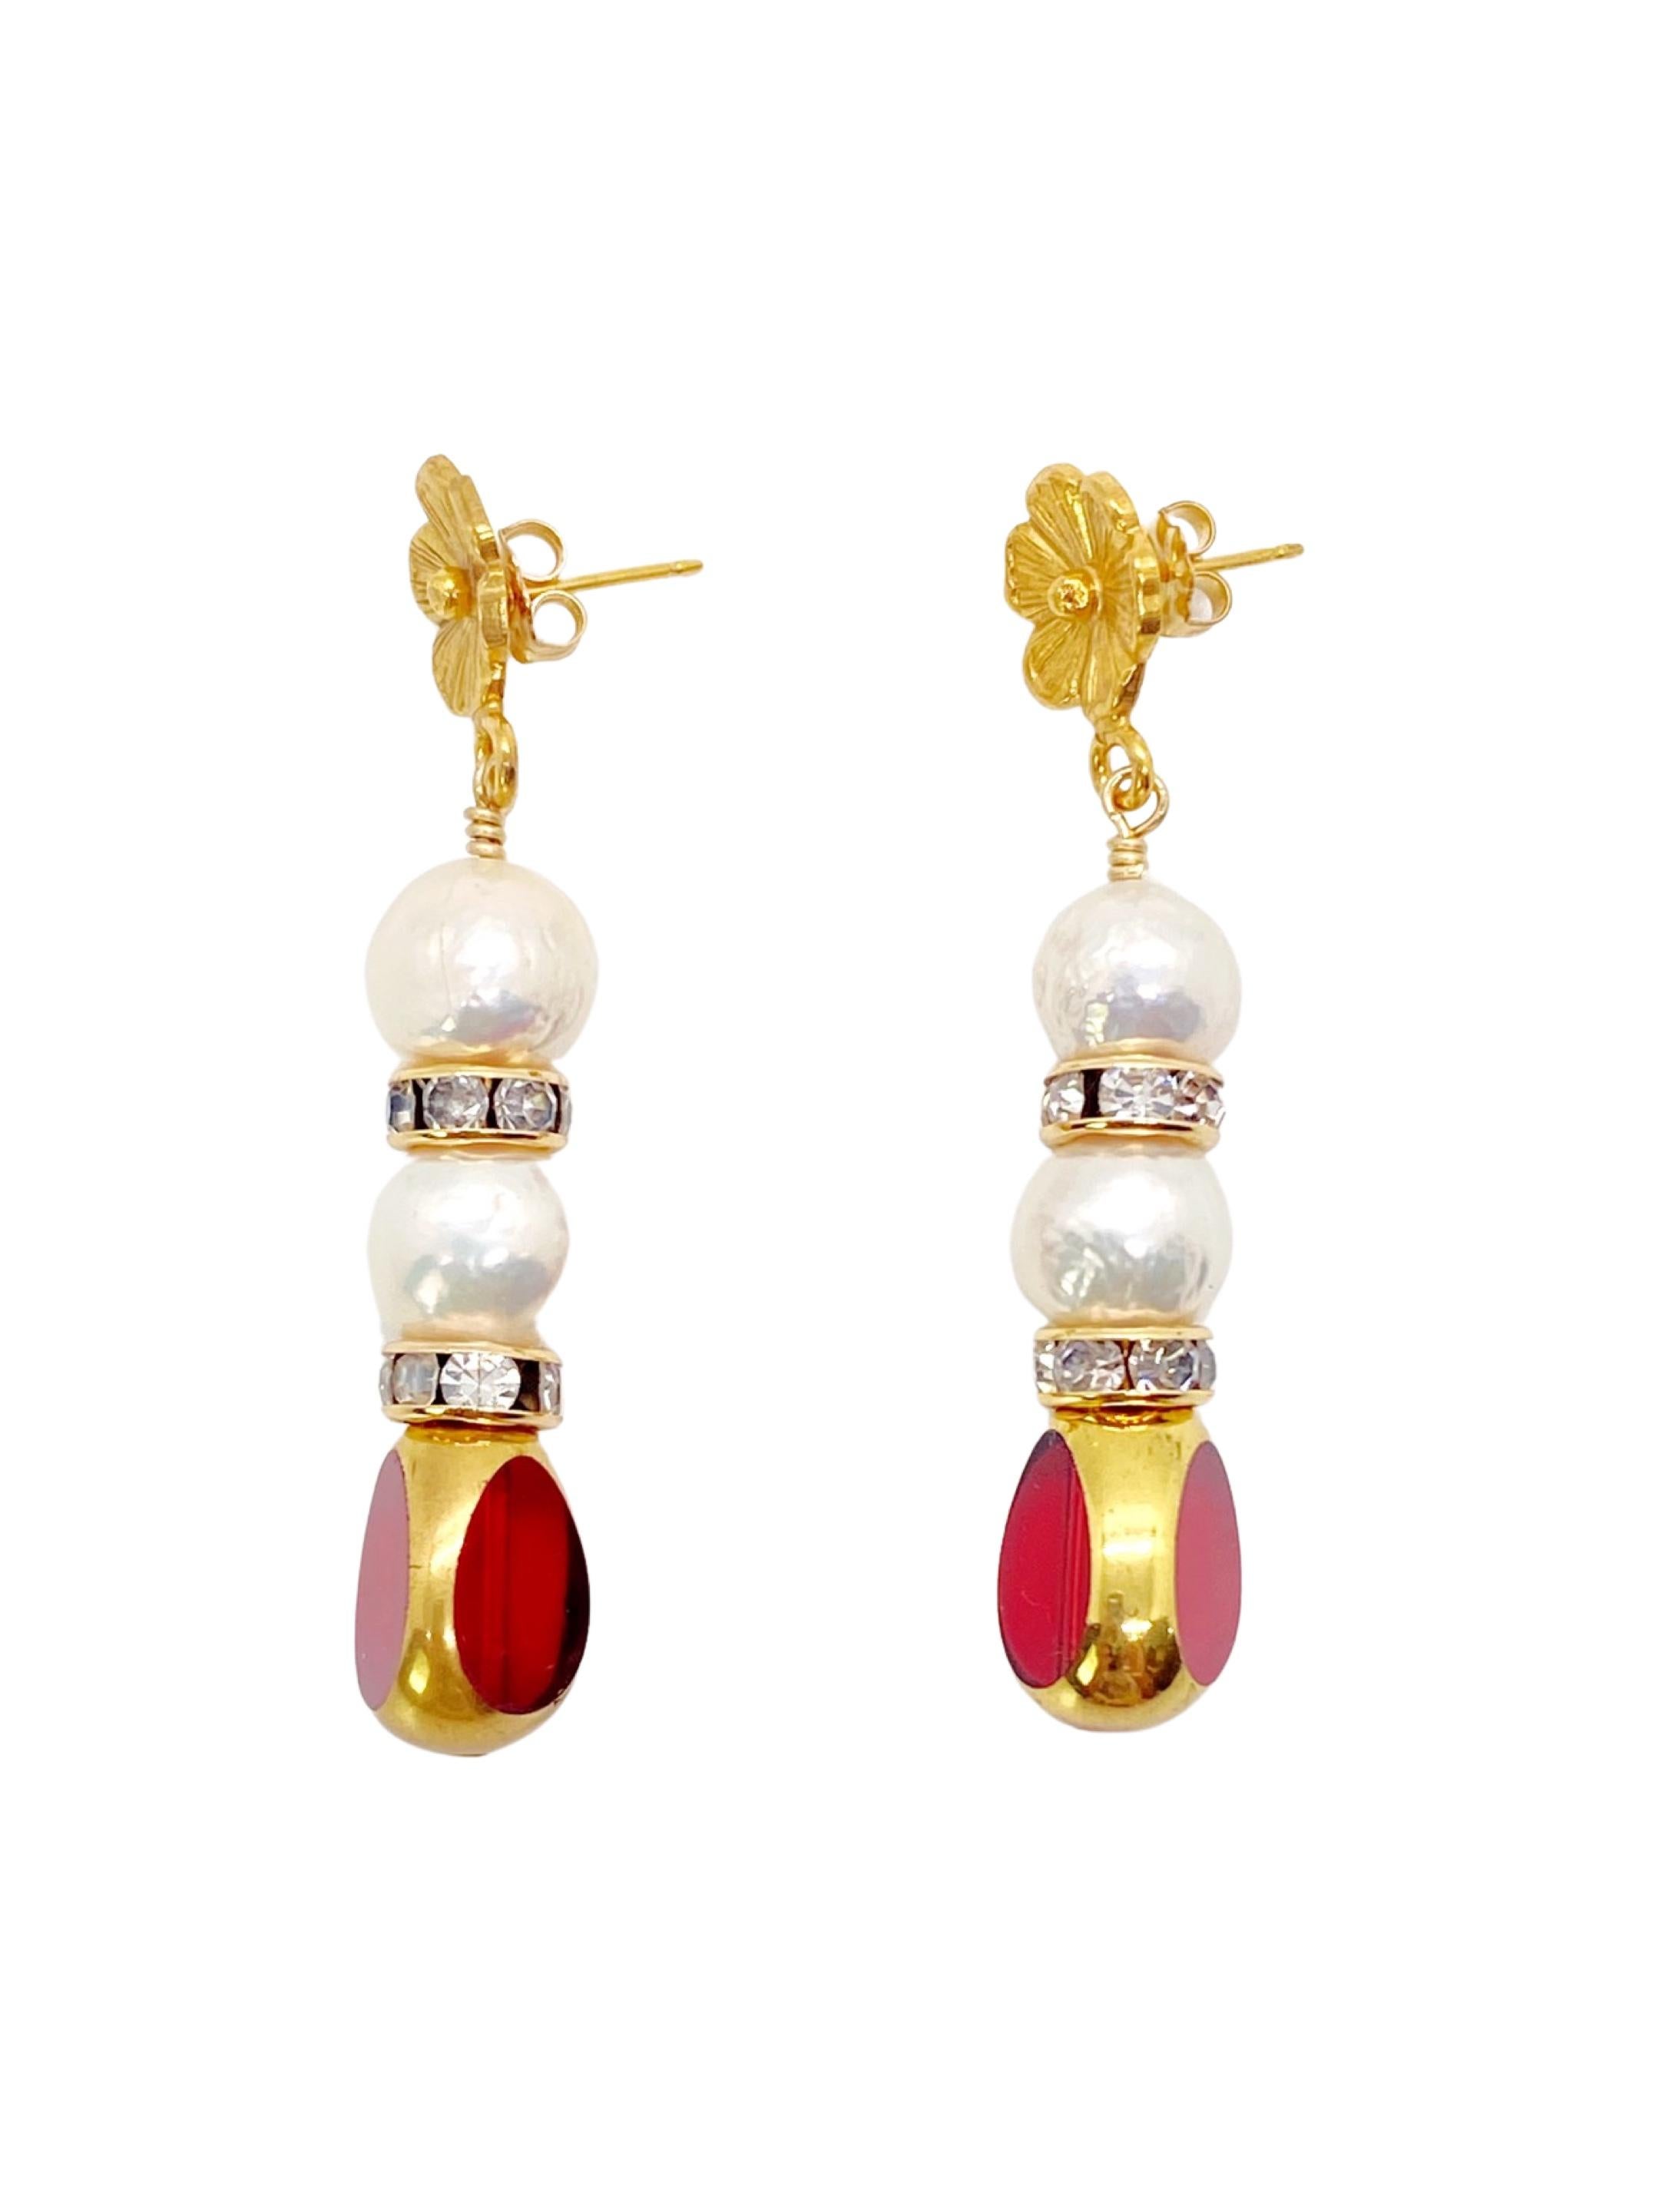 This is for a pair of earrings. Red transparent vintage German glass beads edged with 24K gold are complimented with freshwater pearls. The earrings are finished with 24K gold plated floral earring post and 14K gold filled rhinestones spacers.

The